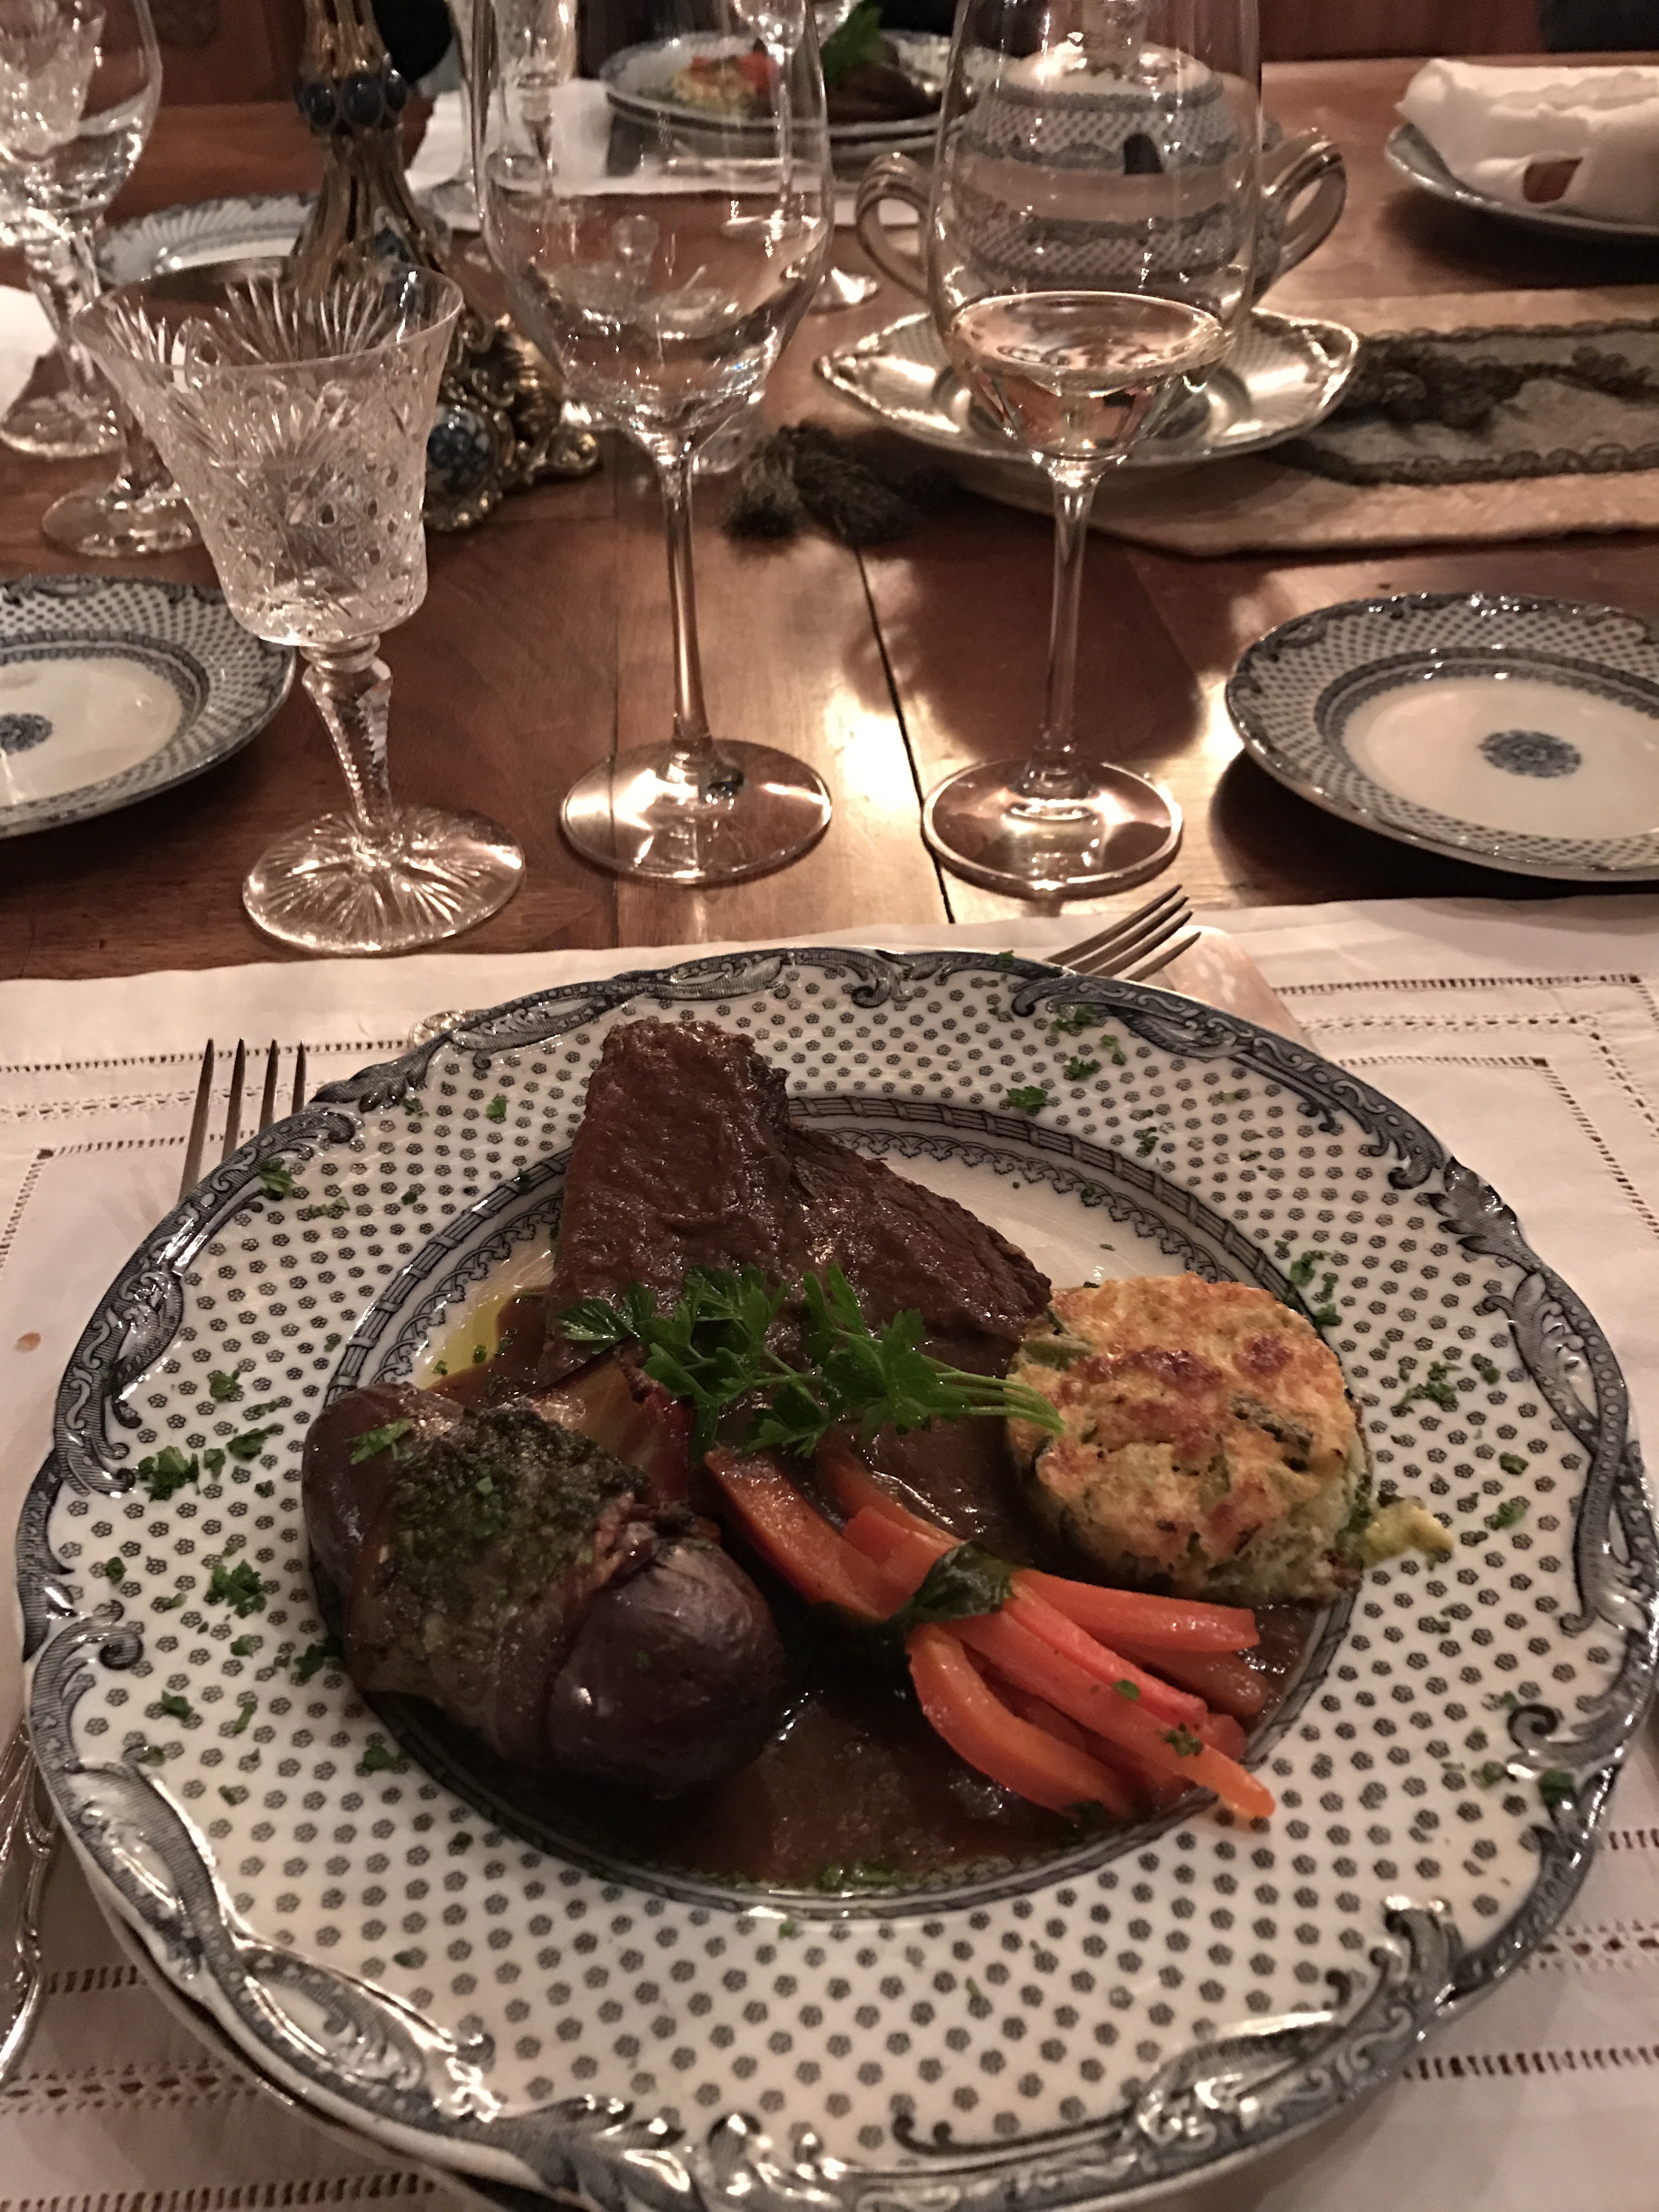 Beef Bourguignon with vegetables grown on the estate.